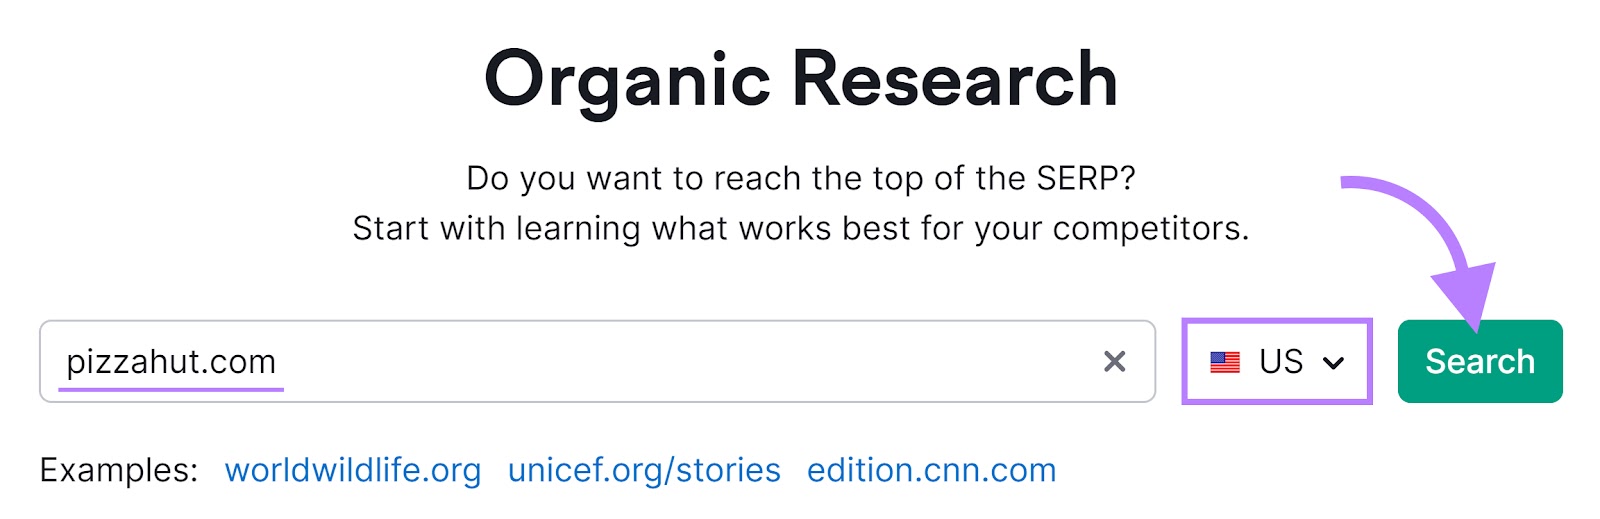 Organic Research tool with "pizzahut.com" in the search field and an arrow pointing to the "Search" button.